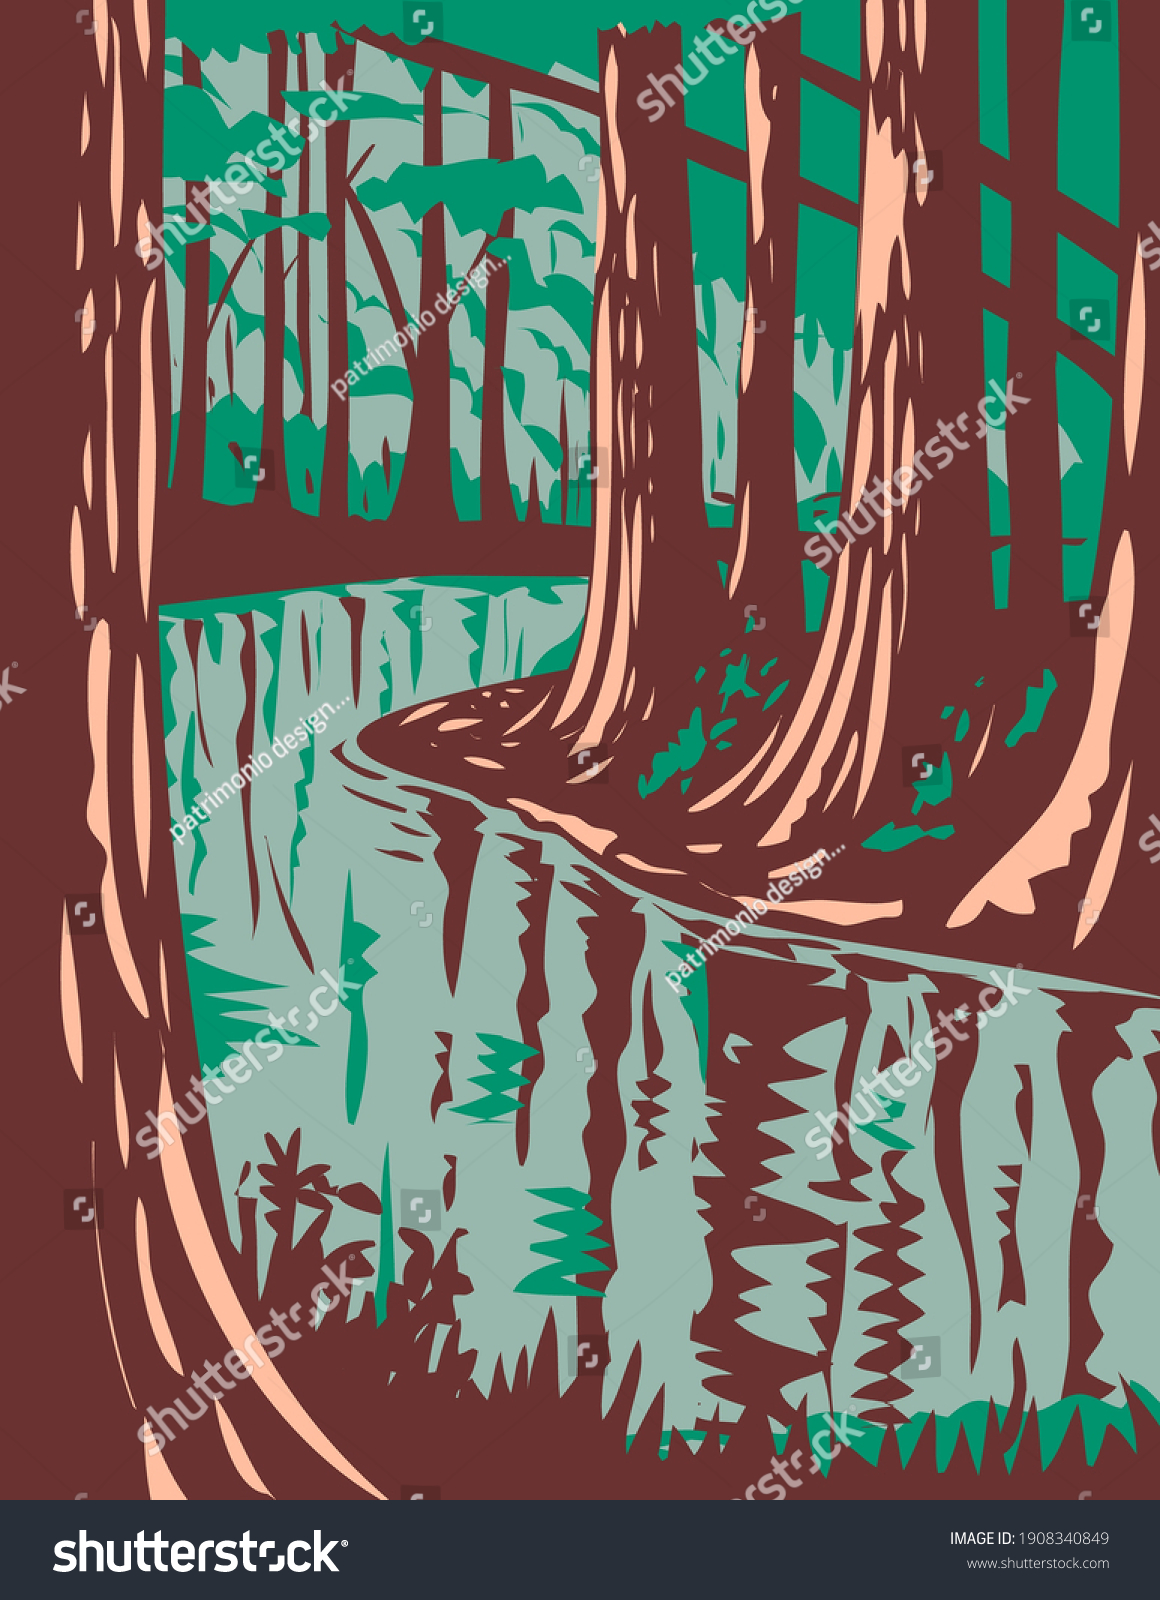 SVG of Cedar Creek at the Congaree National Park in Central South Carolina United States of America WPA Poster Art svg